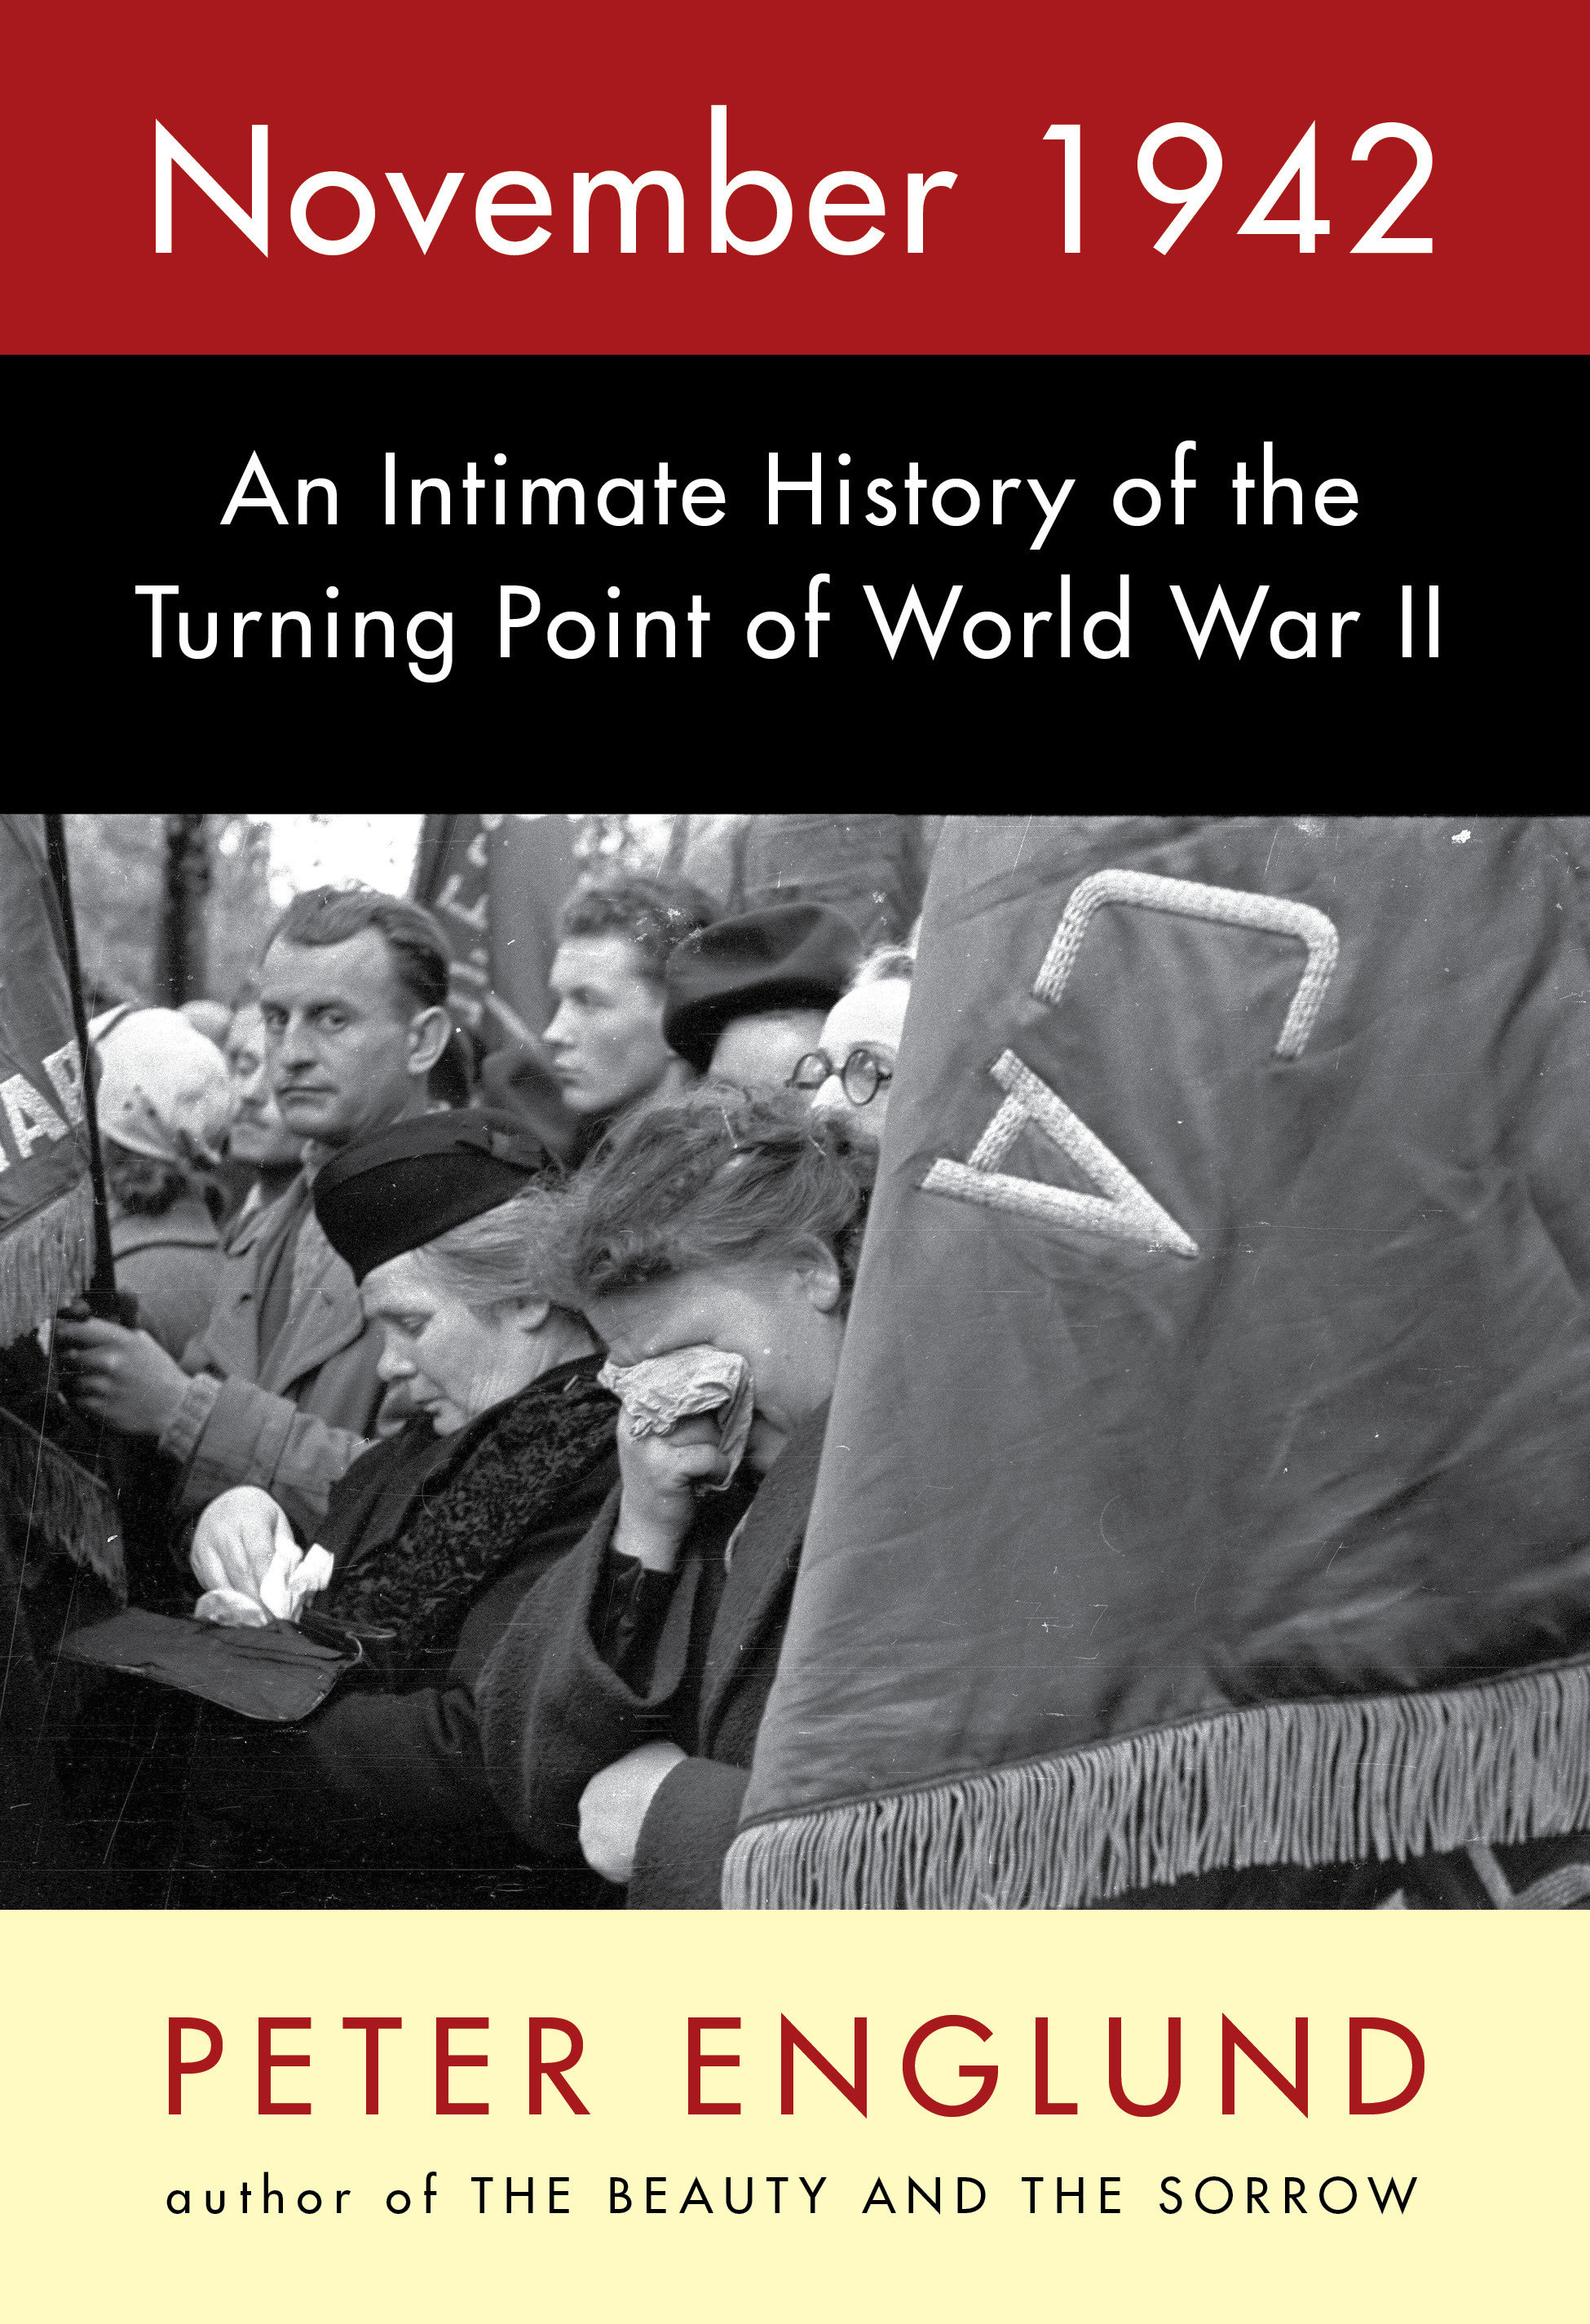 November 1942 An Intimate History of the Turning Point of World War II cover image